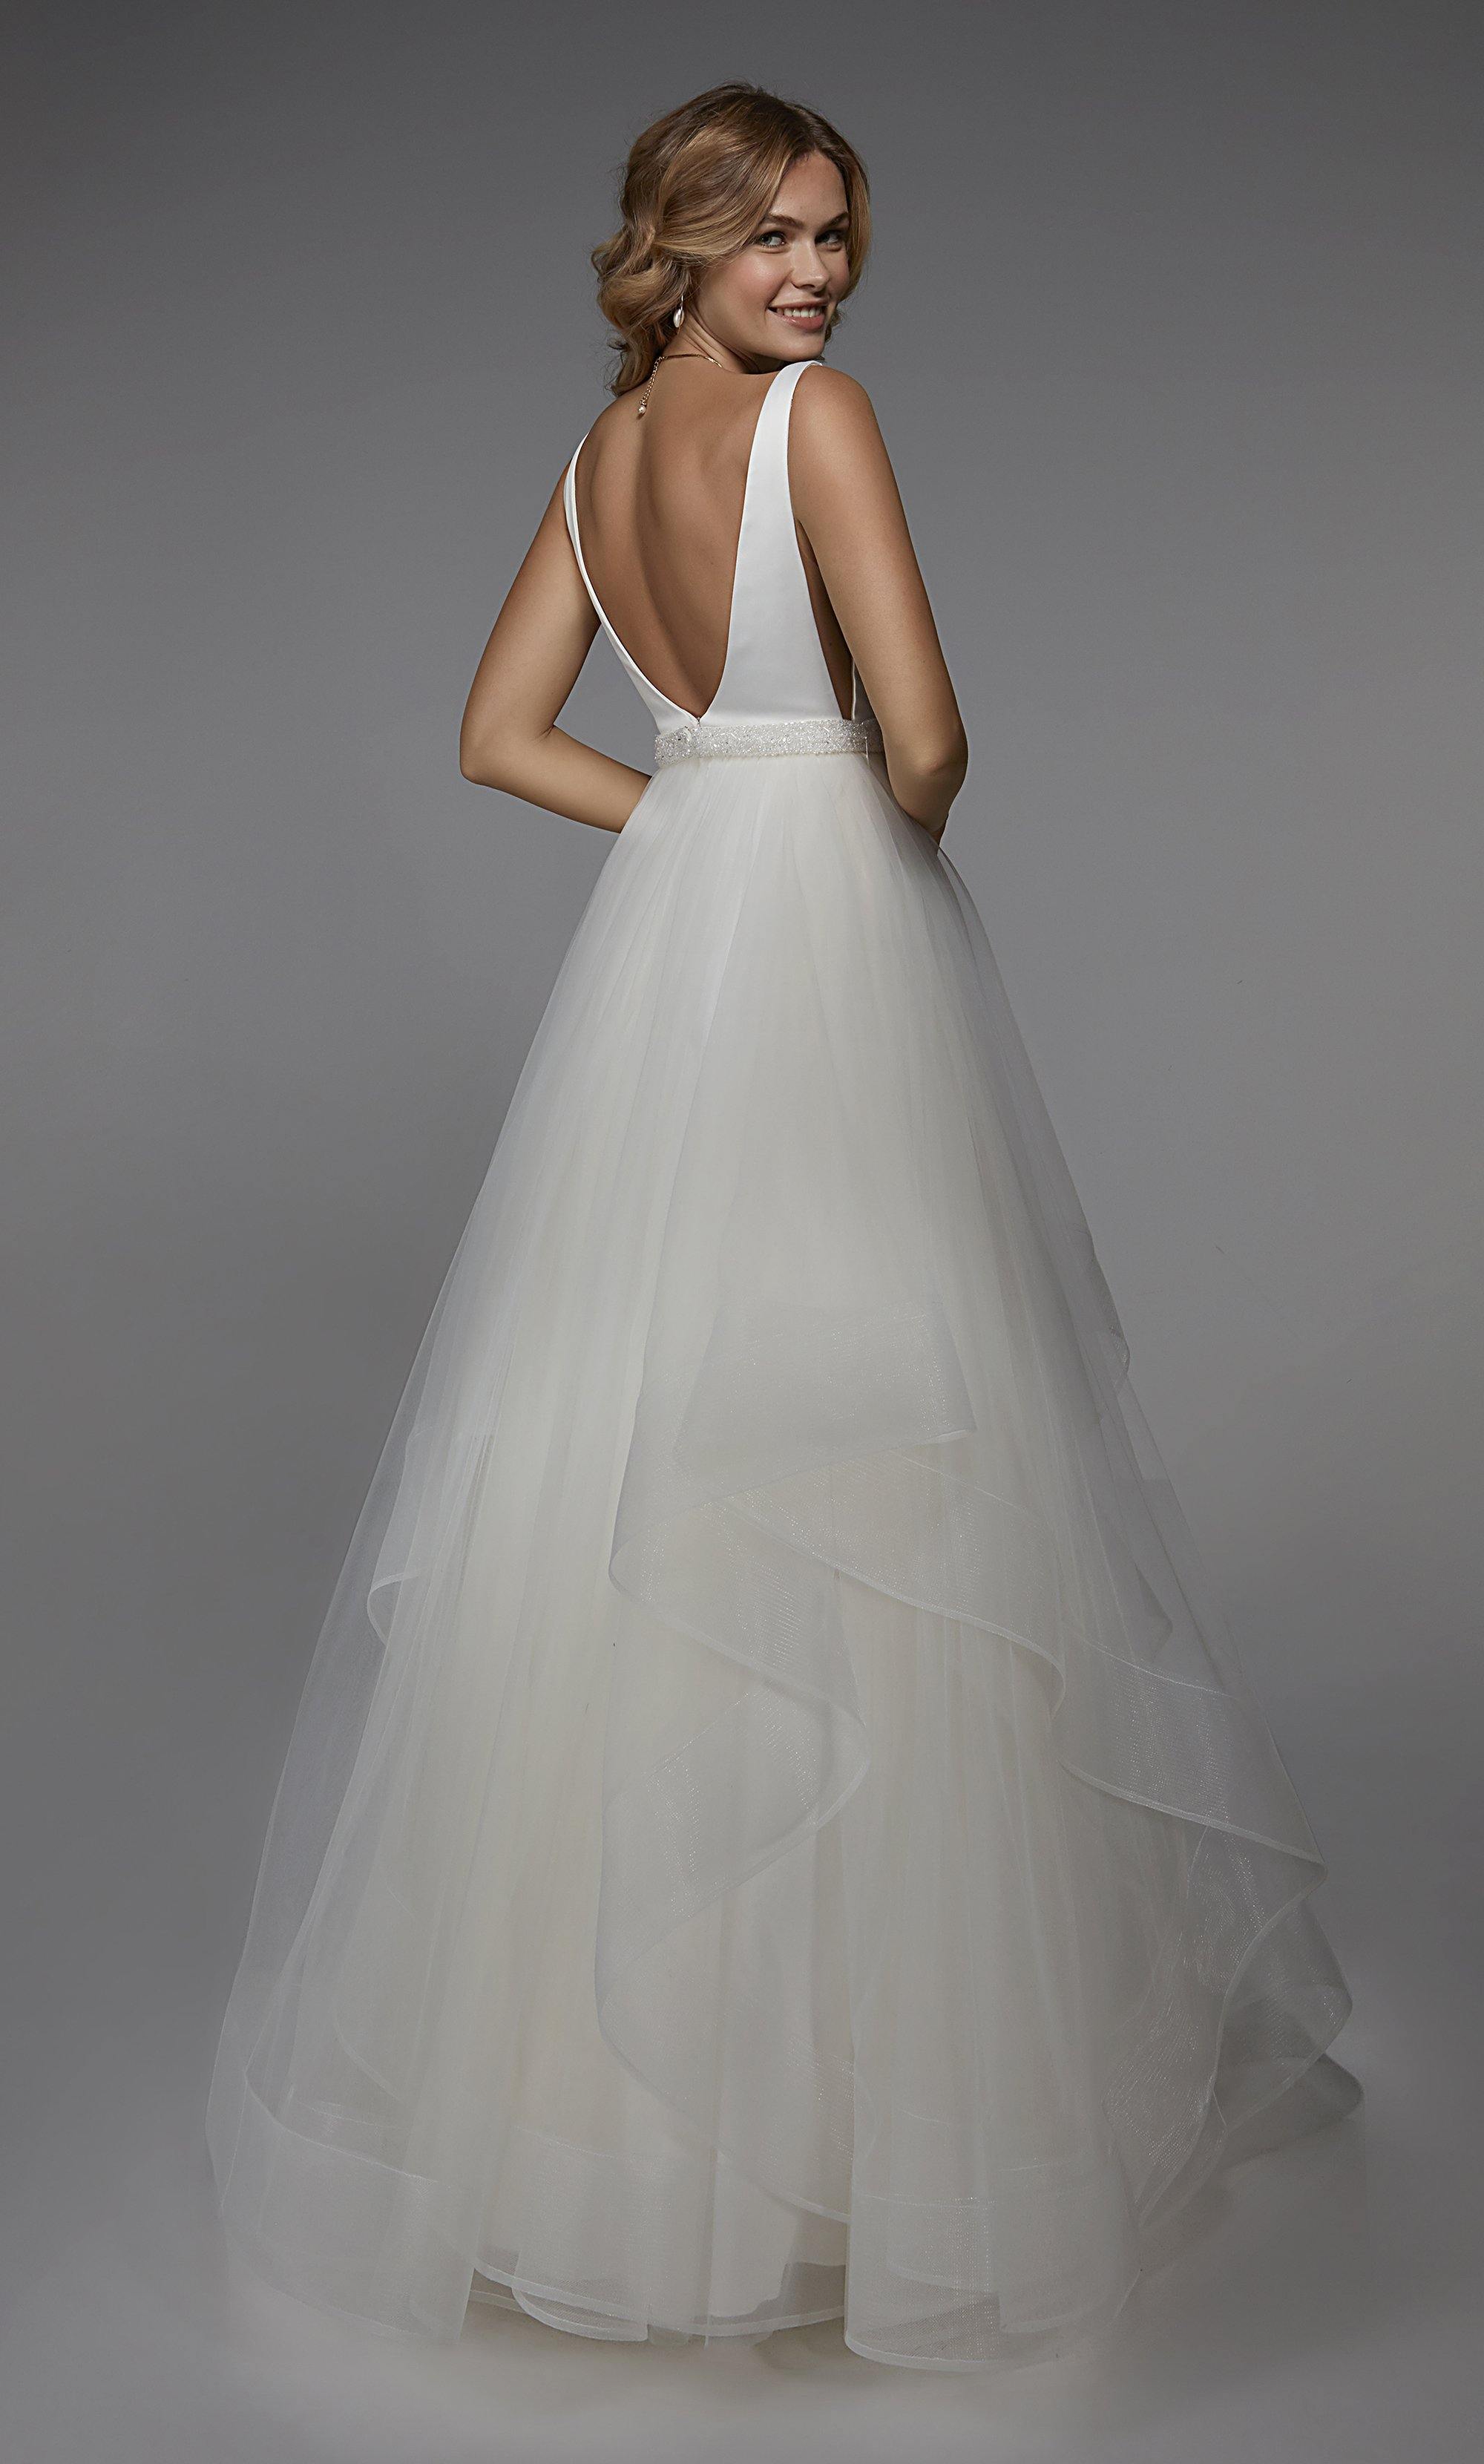 Formal Dress: 7022. Long Bridal Gown, Plunging Neckline, Ball Gown Alyce Paris